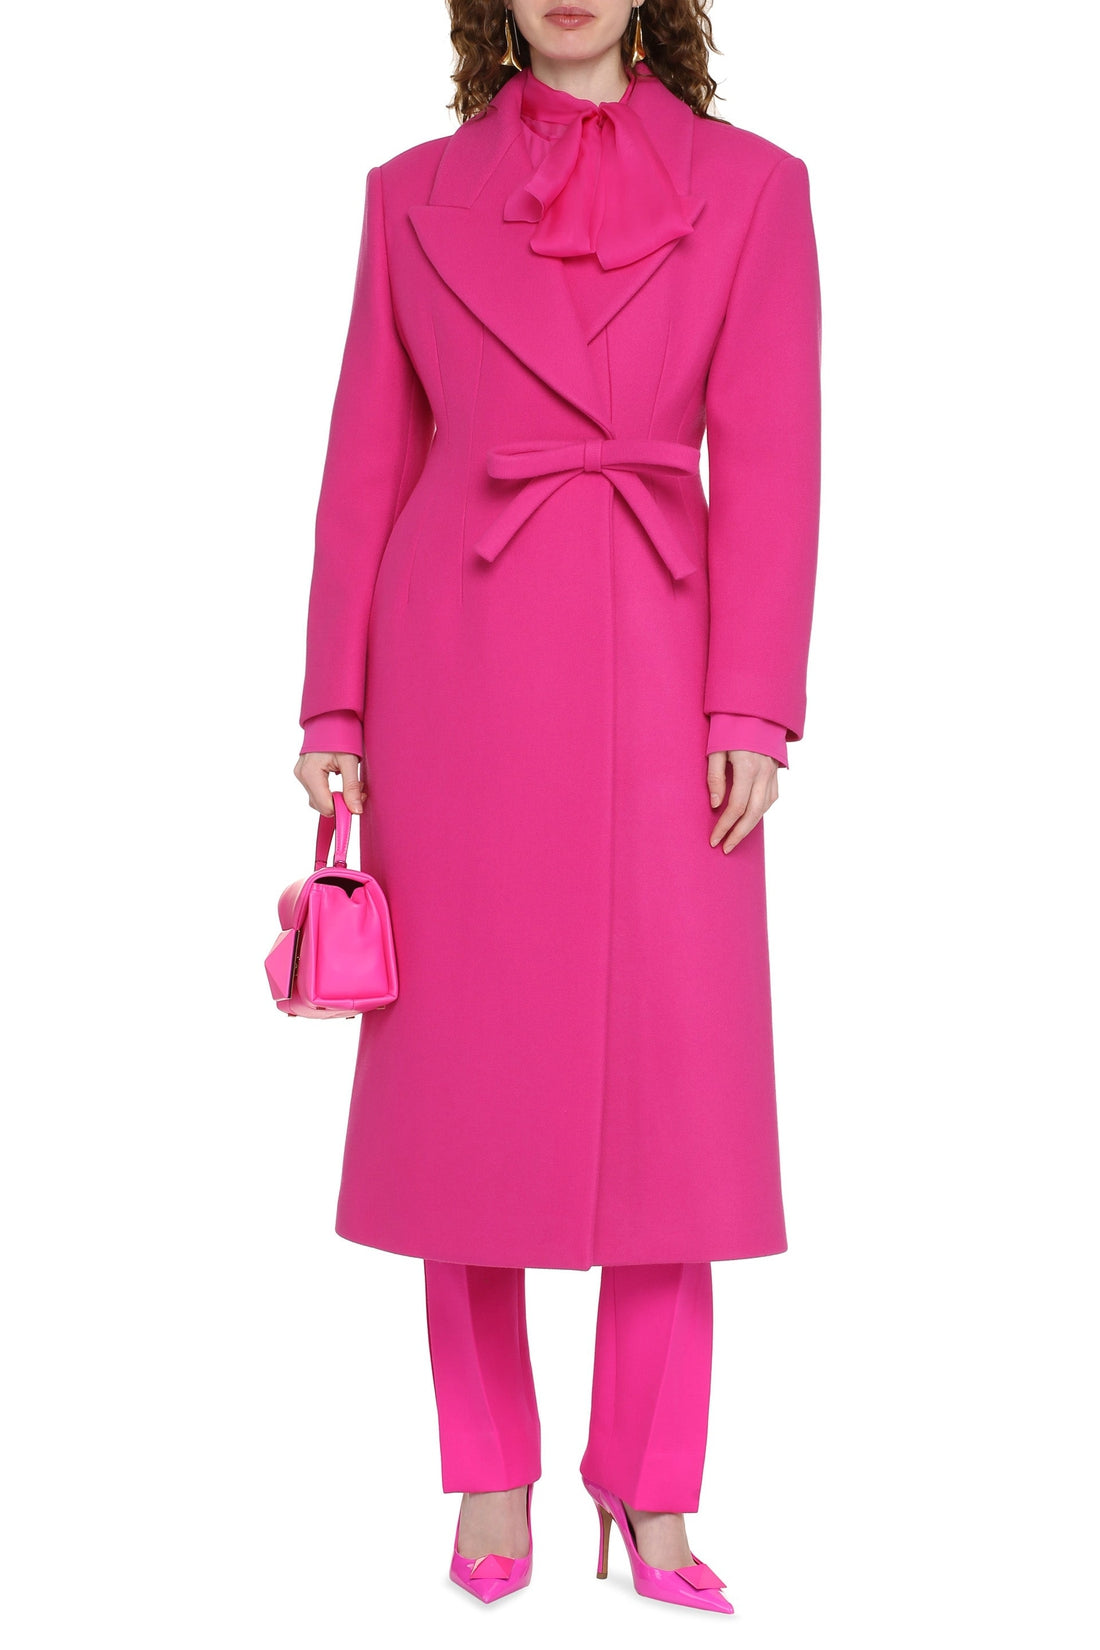 Valentino-OUTLET-SALE-Double-breasted wool coat-ARCHIVIST